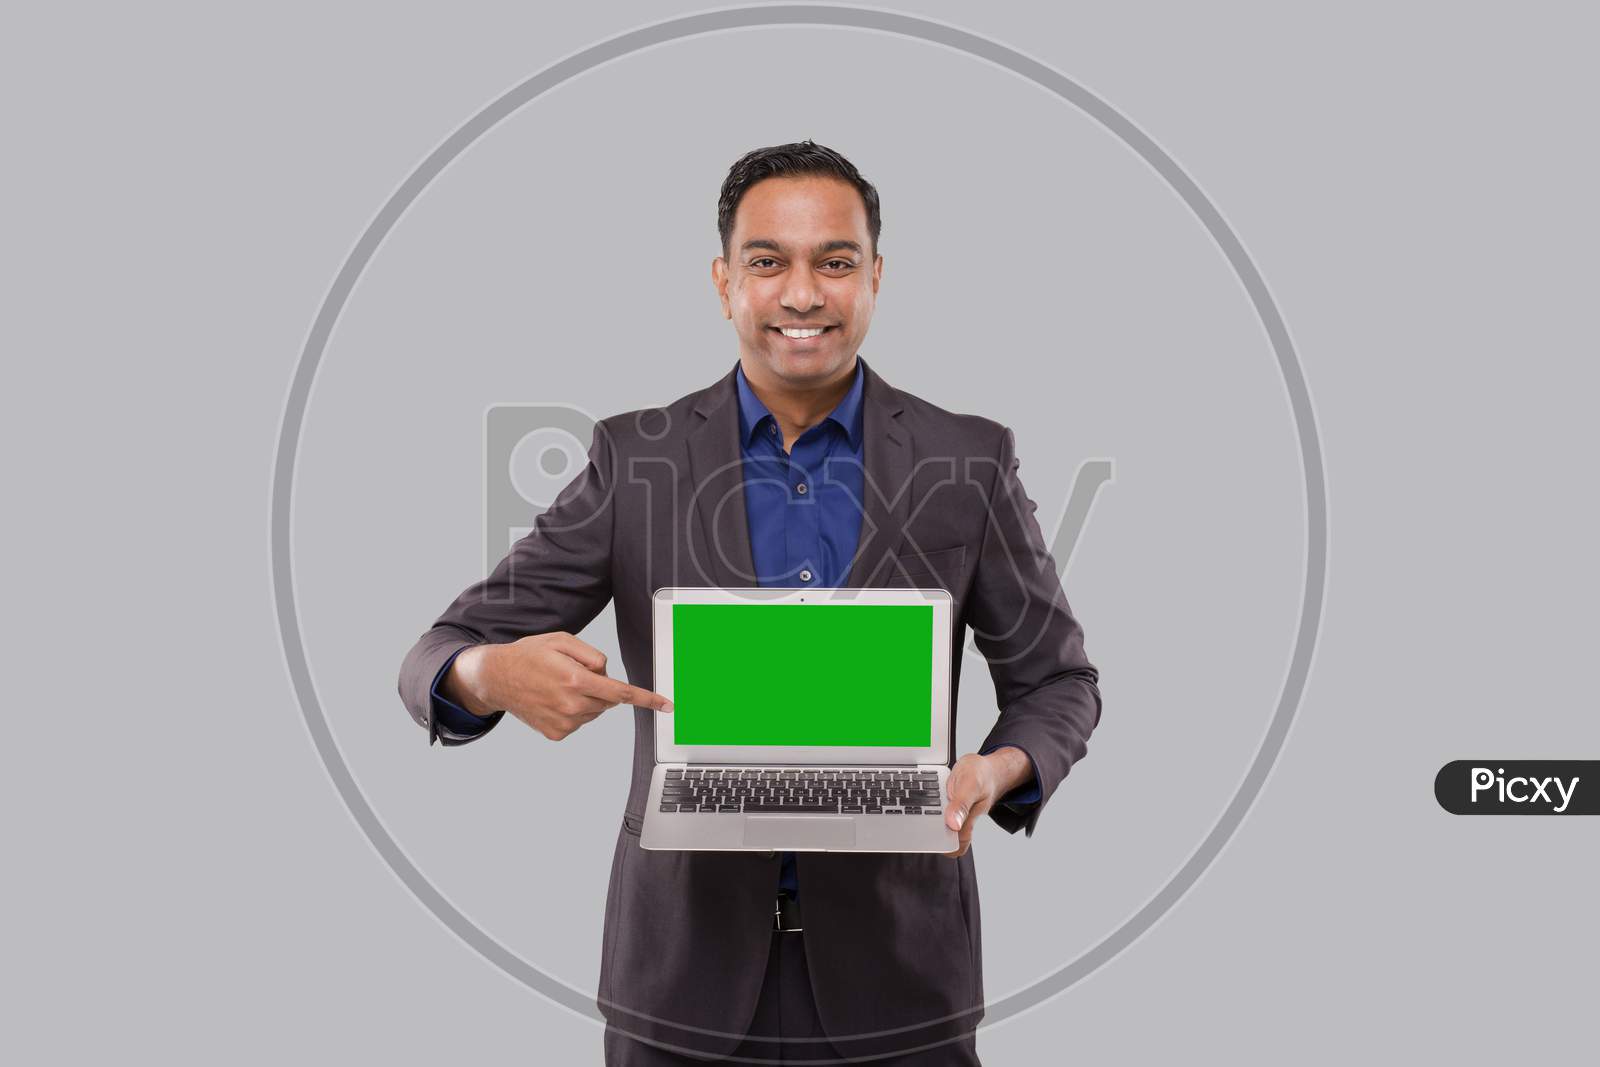 Businessman Pointing At Laptop Green Screen Isolated. Indian Business Man With Laptop In Hands. Online Business Concept